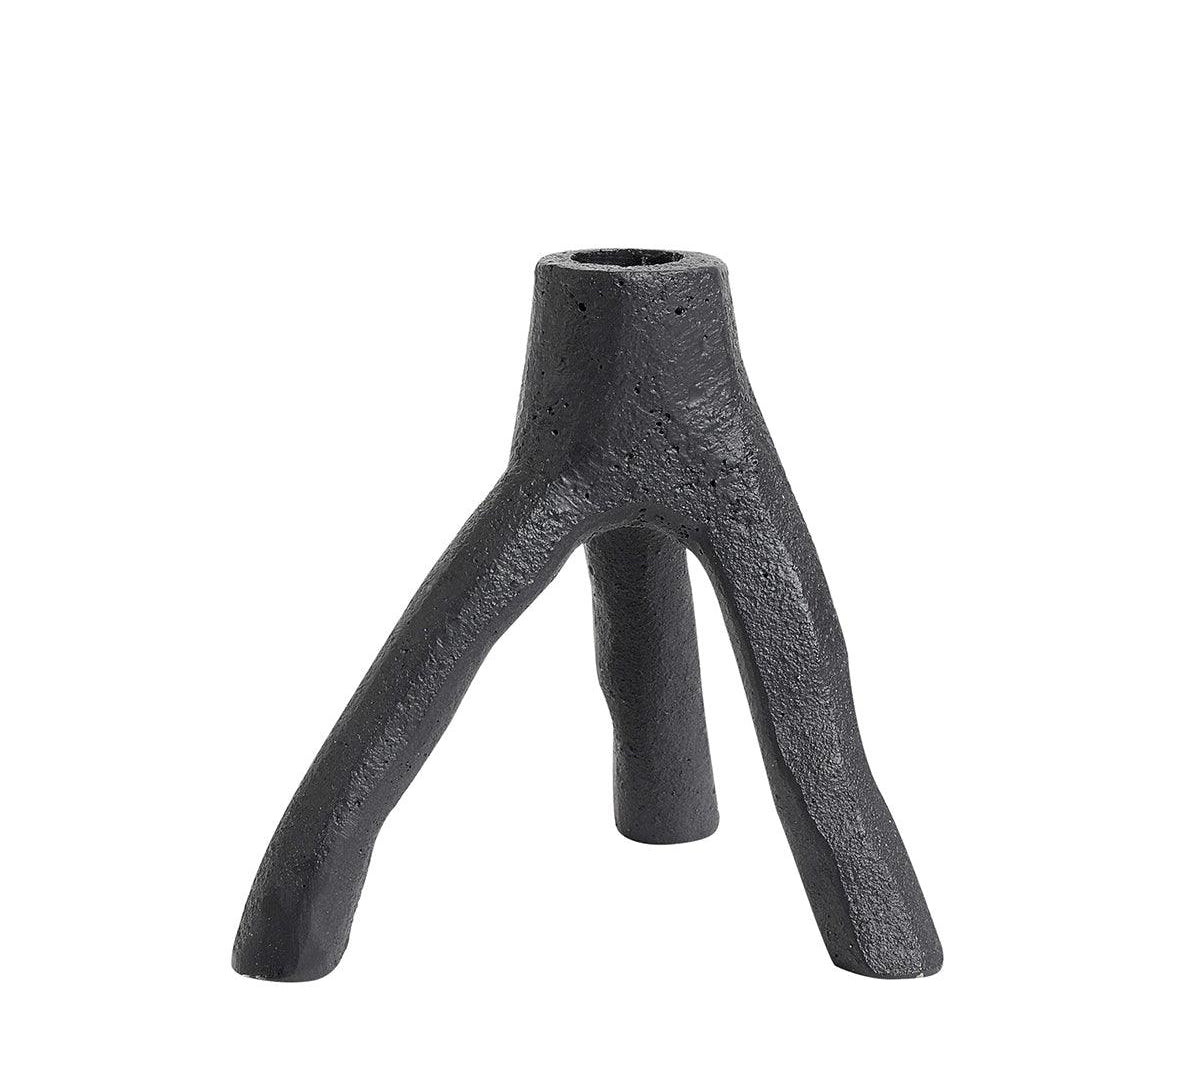 Candle Holder Iron S, Muubs, LABEL17